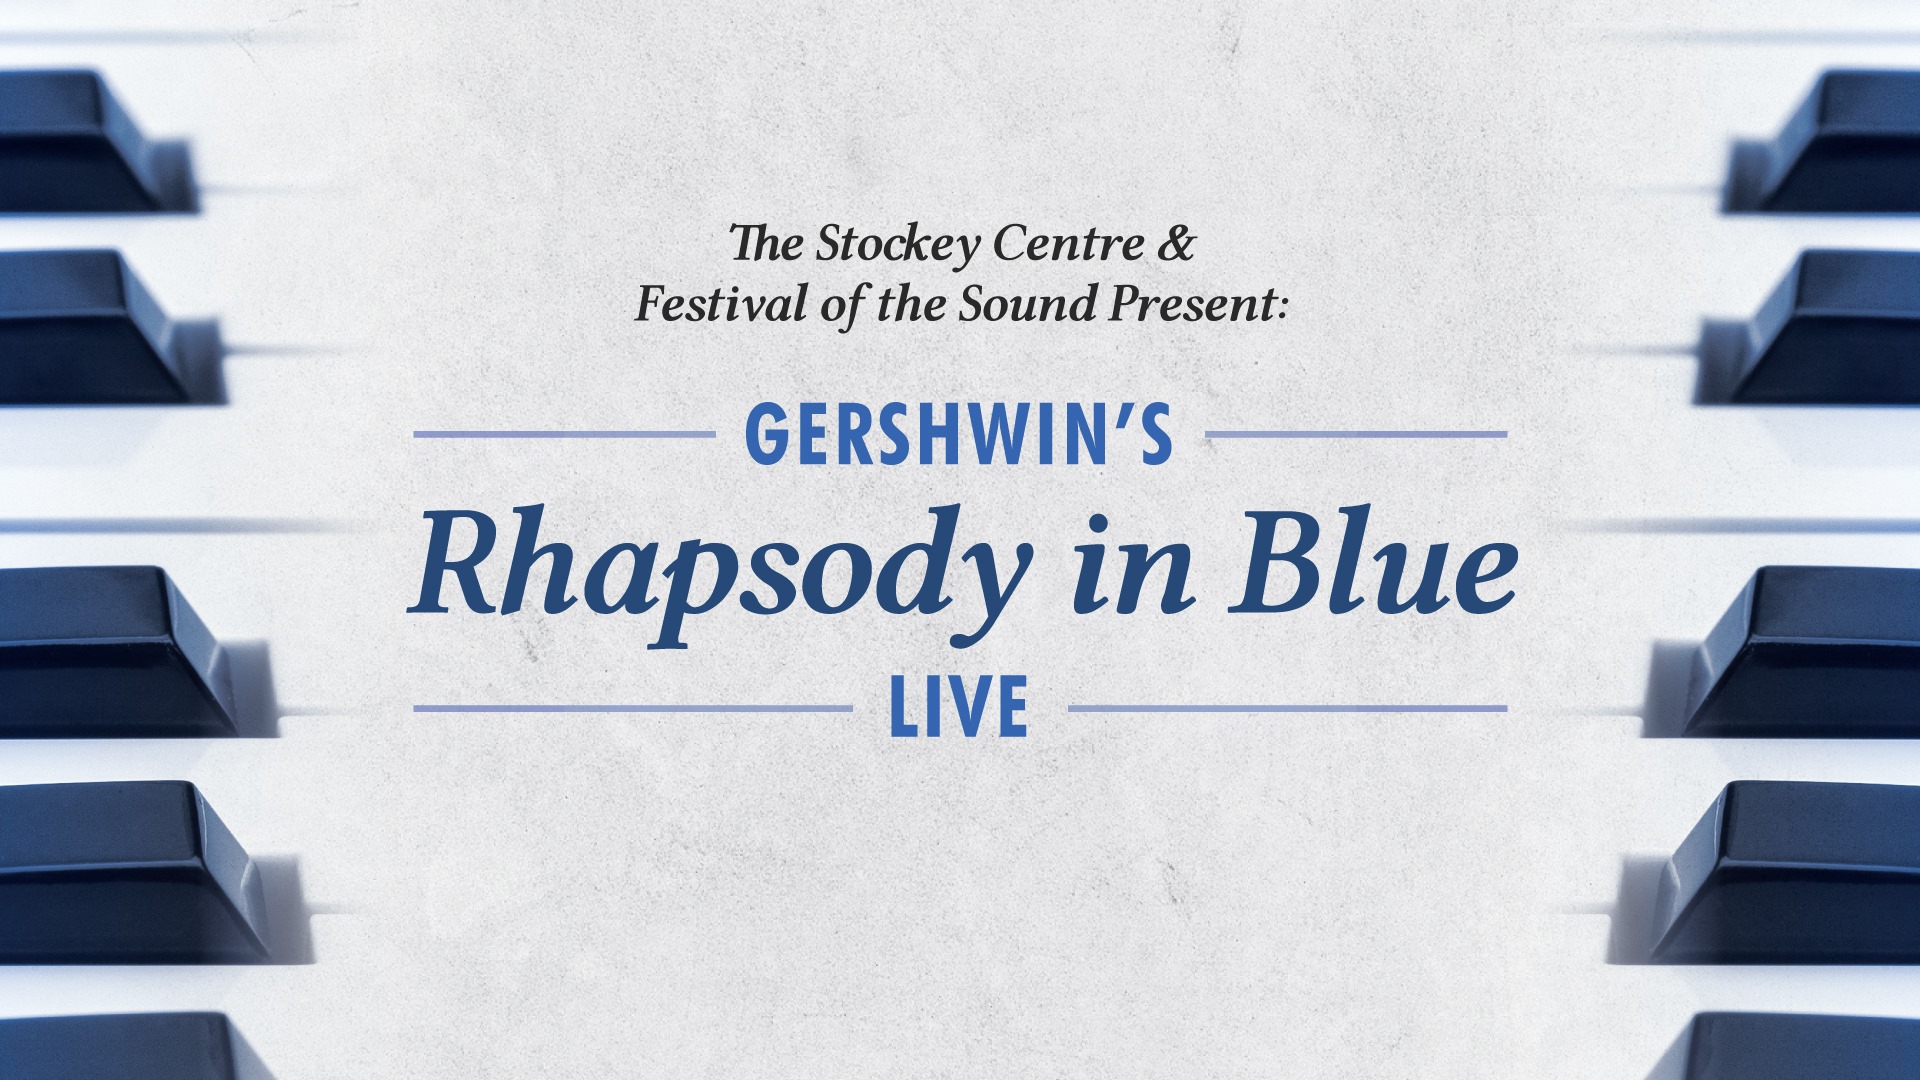 The Stockey Centre and Festival of the Sound present Rhapsody in Blue Live